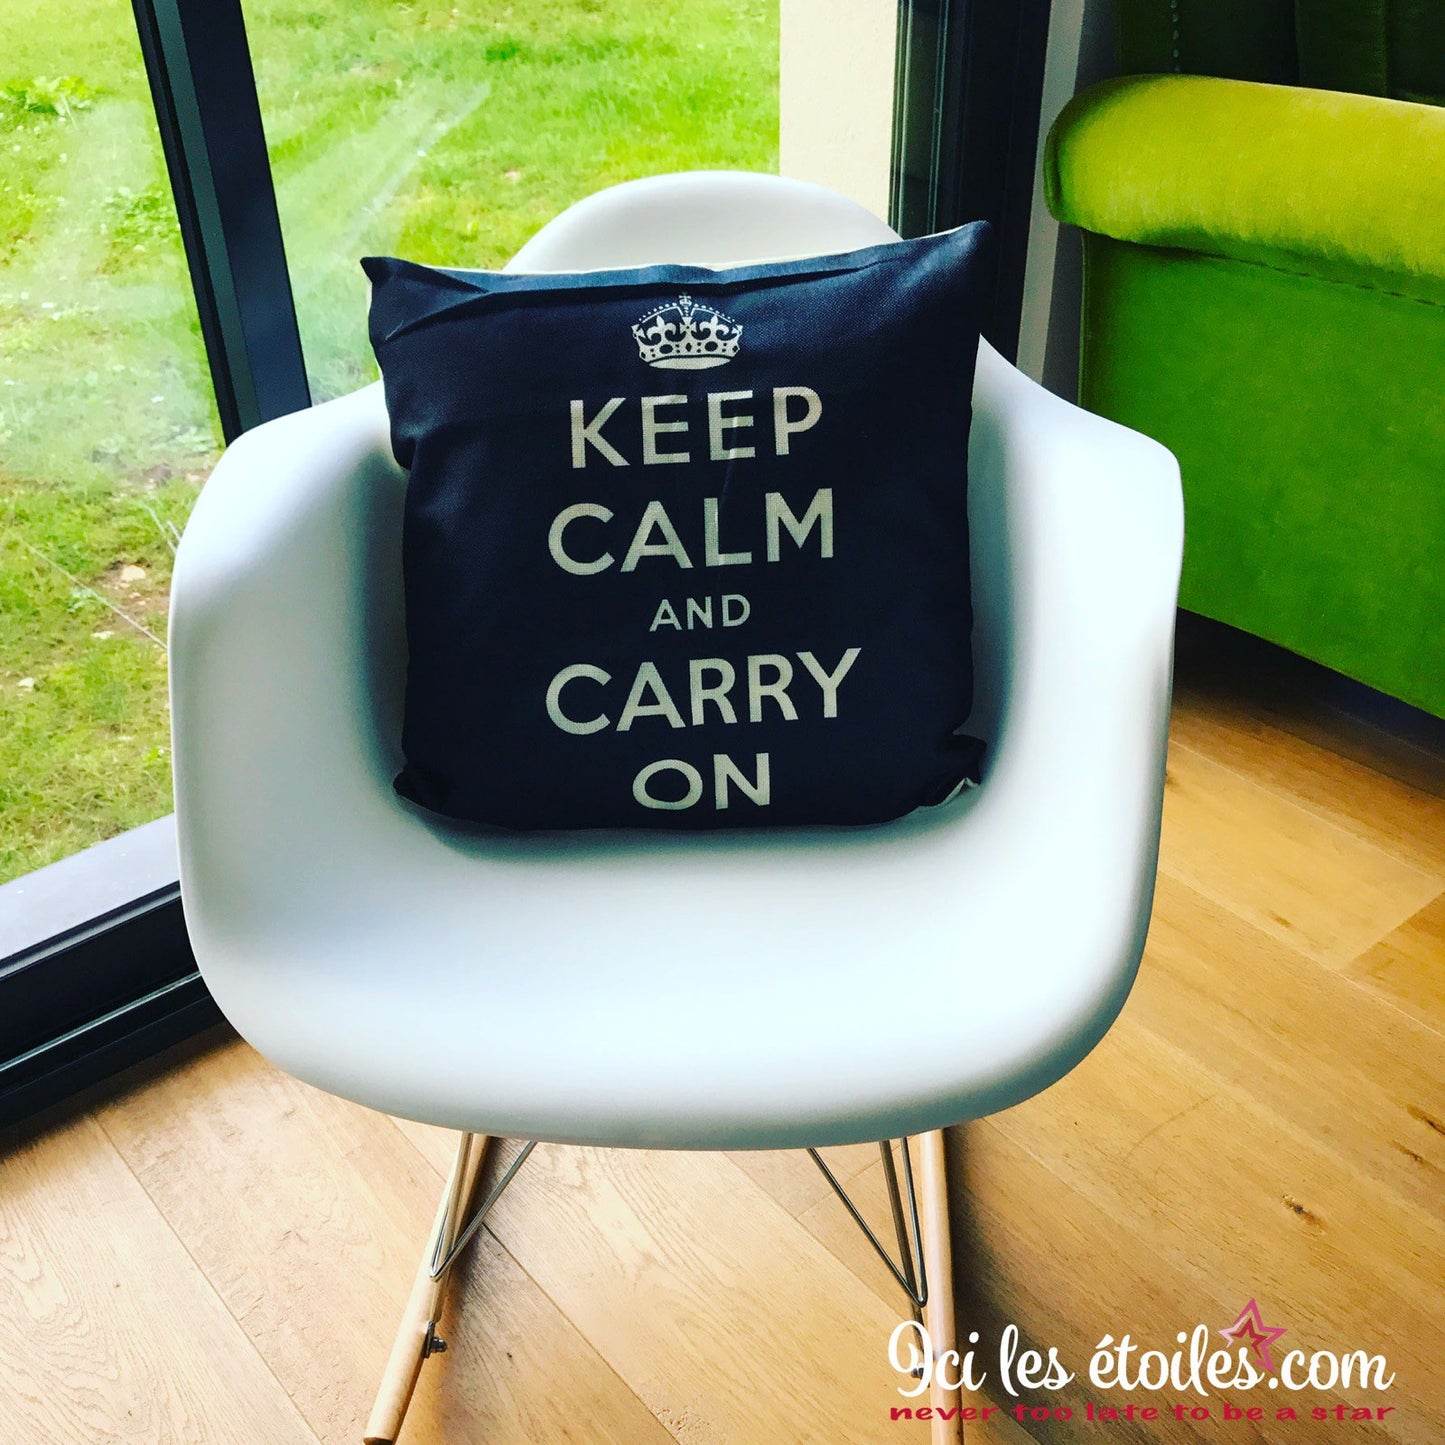 Housse de coussin "Keep Calm and Carry on"